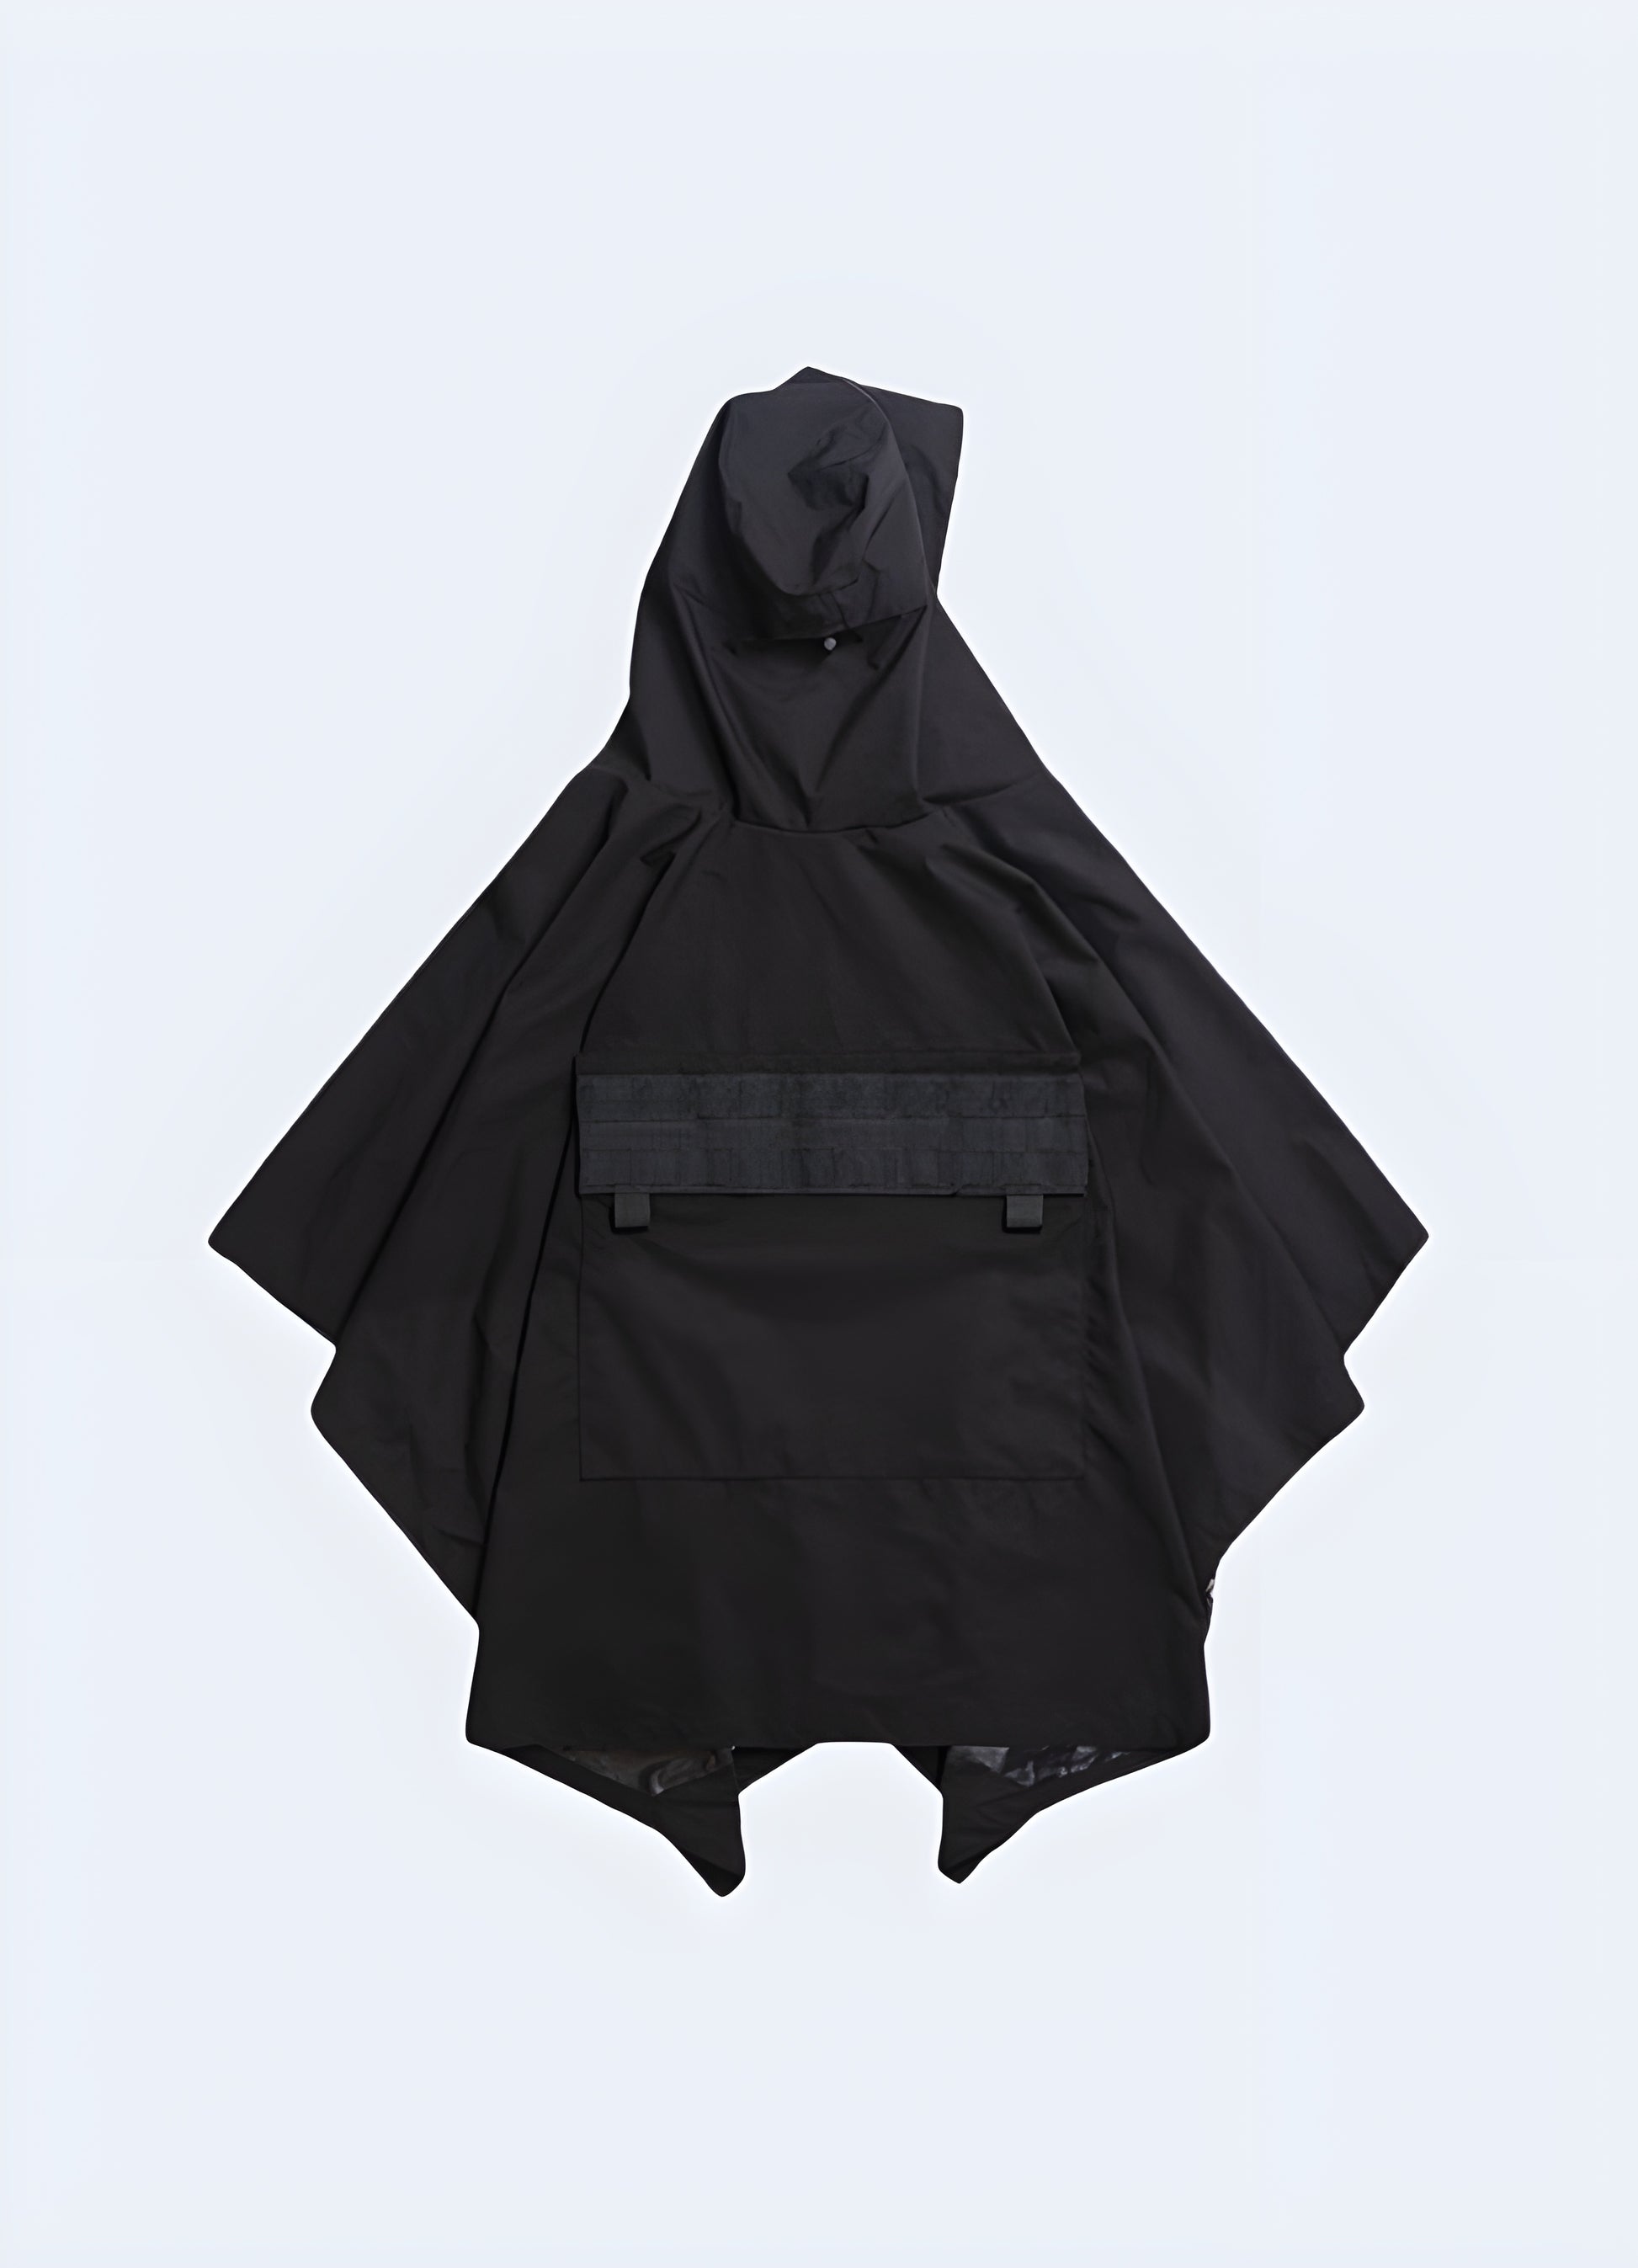 Technical grey poncho with utility pockets.